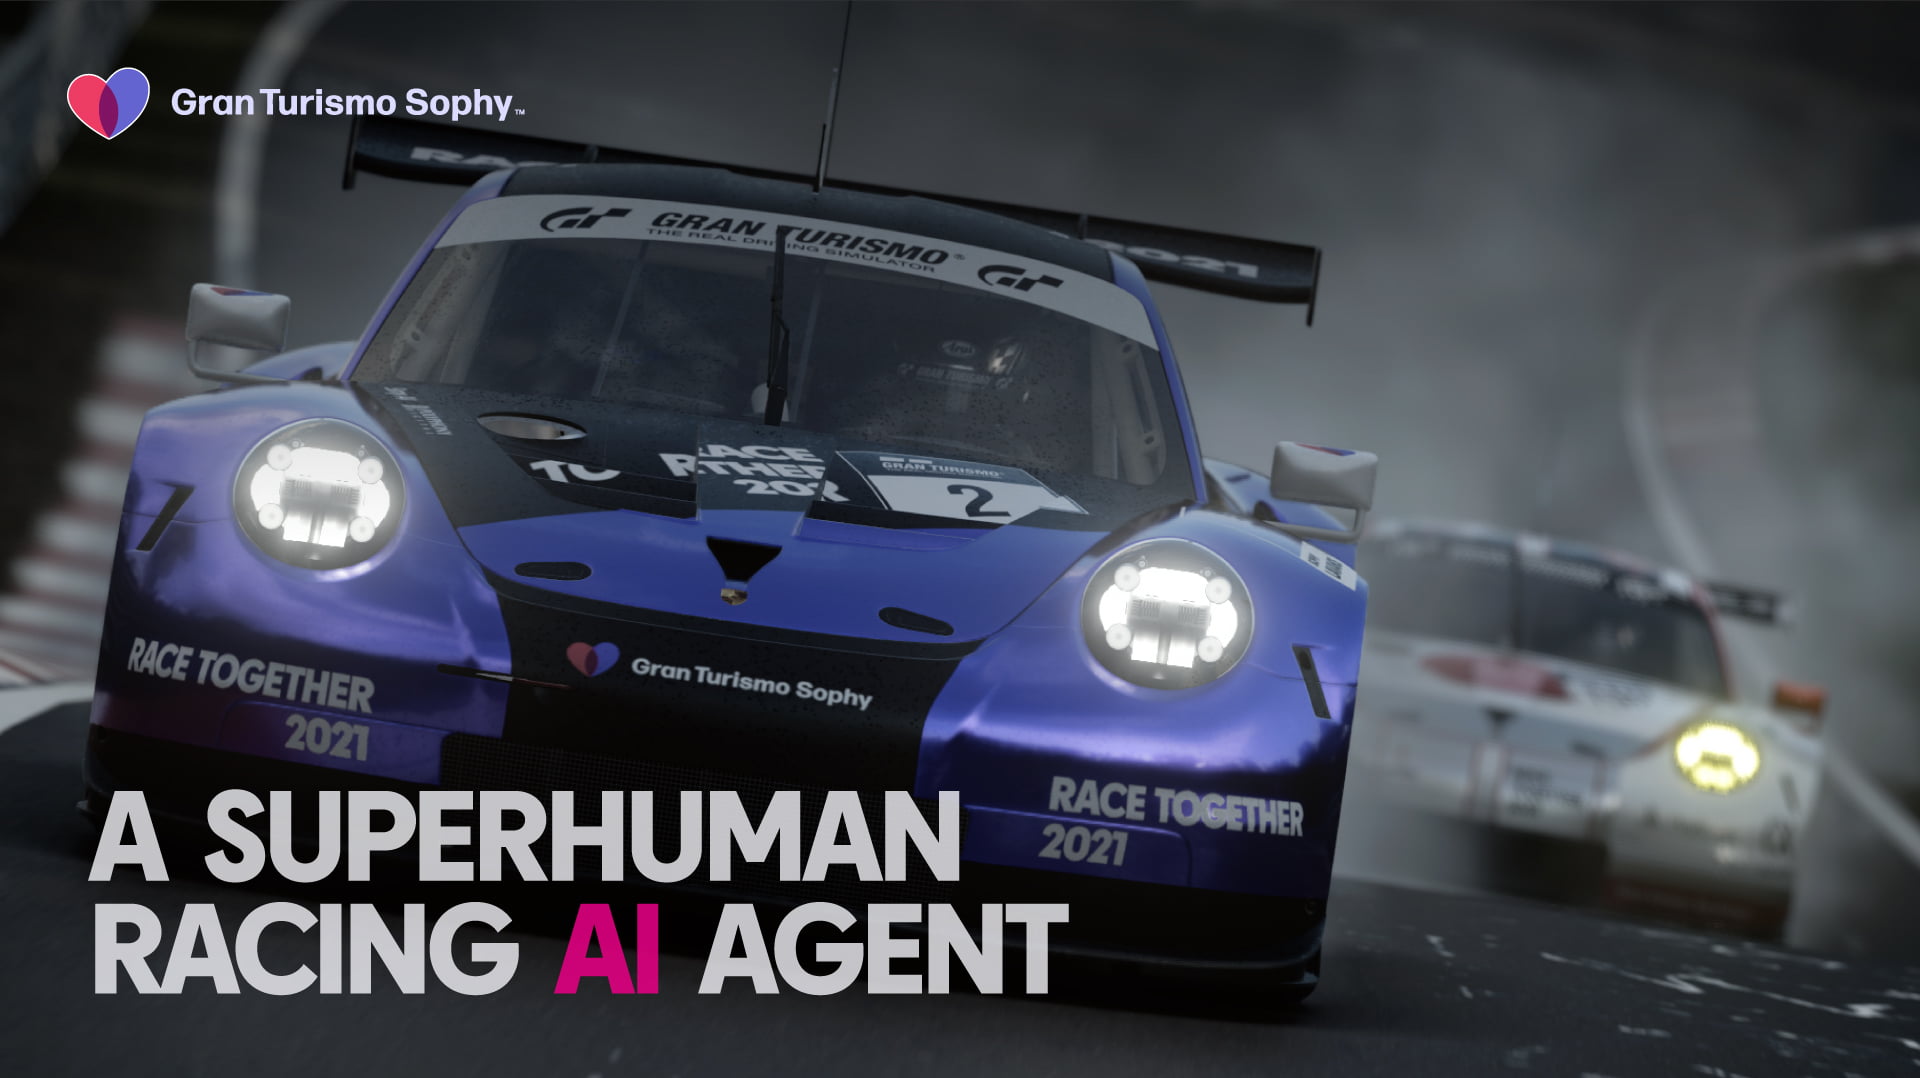 GT Sophy: Sony has trained “superhuman AI” for Gran Turismo